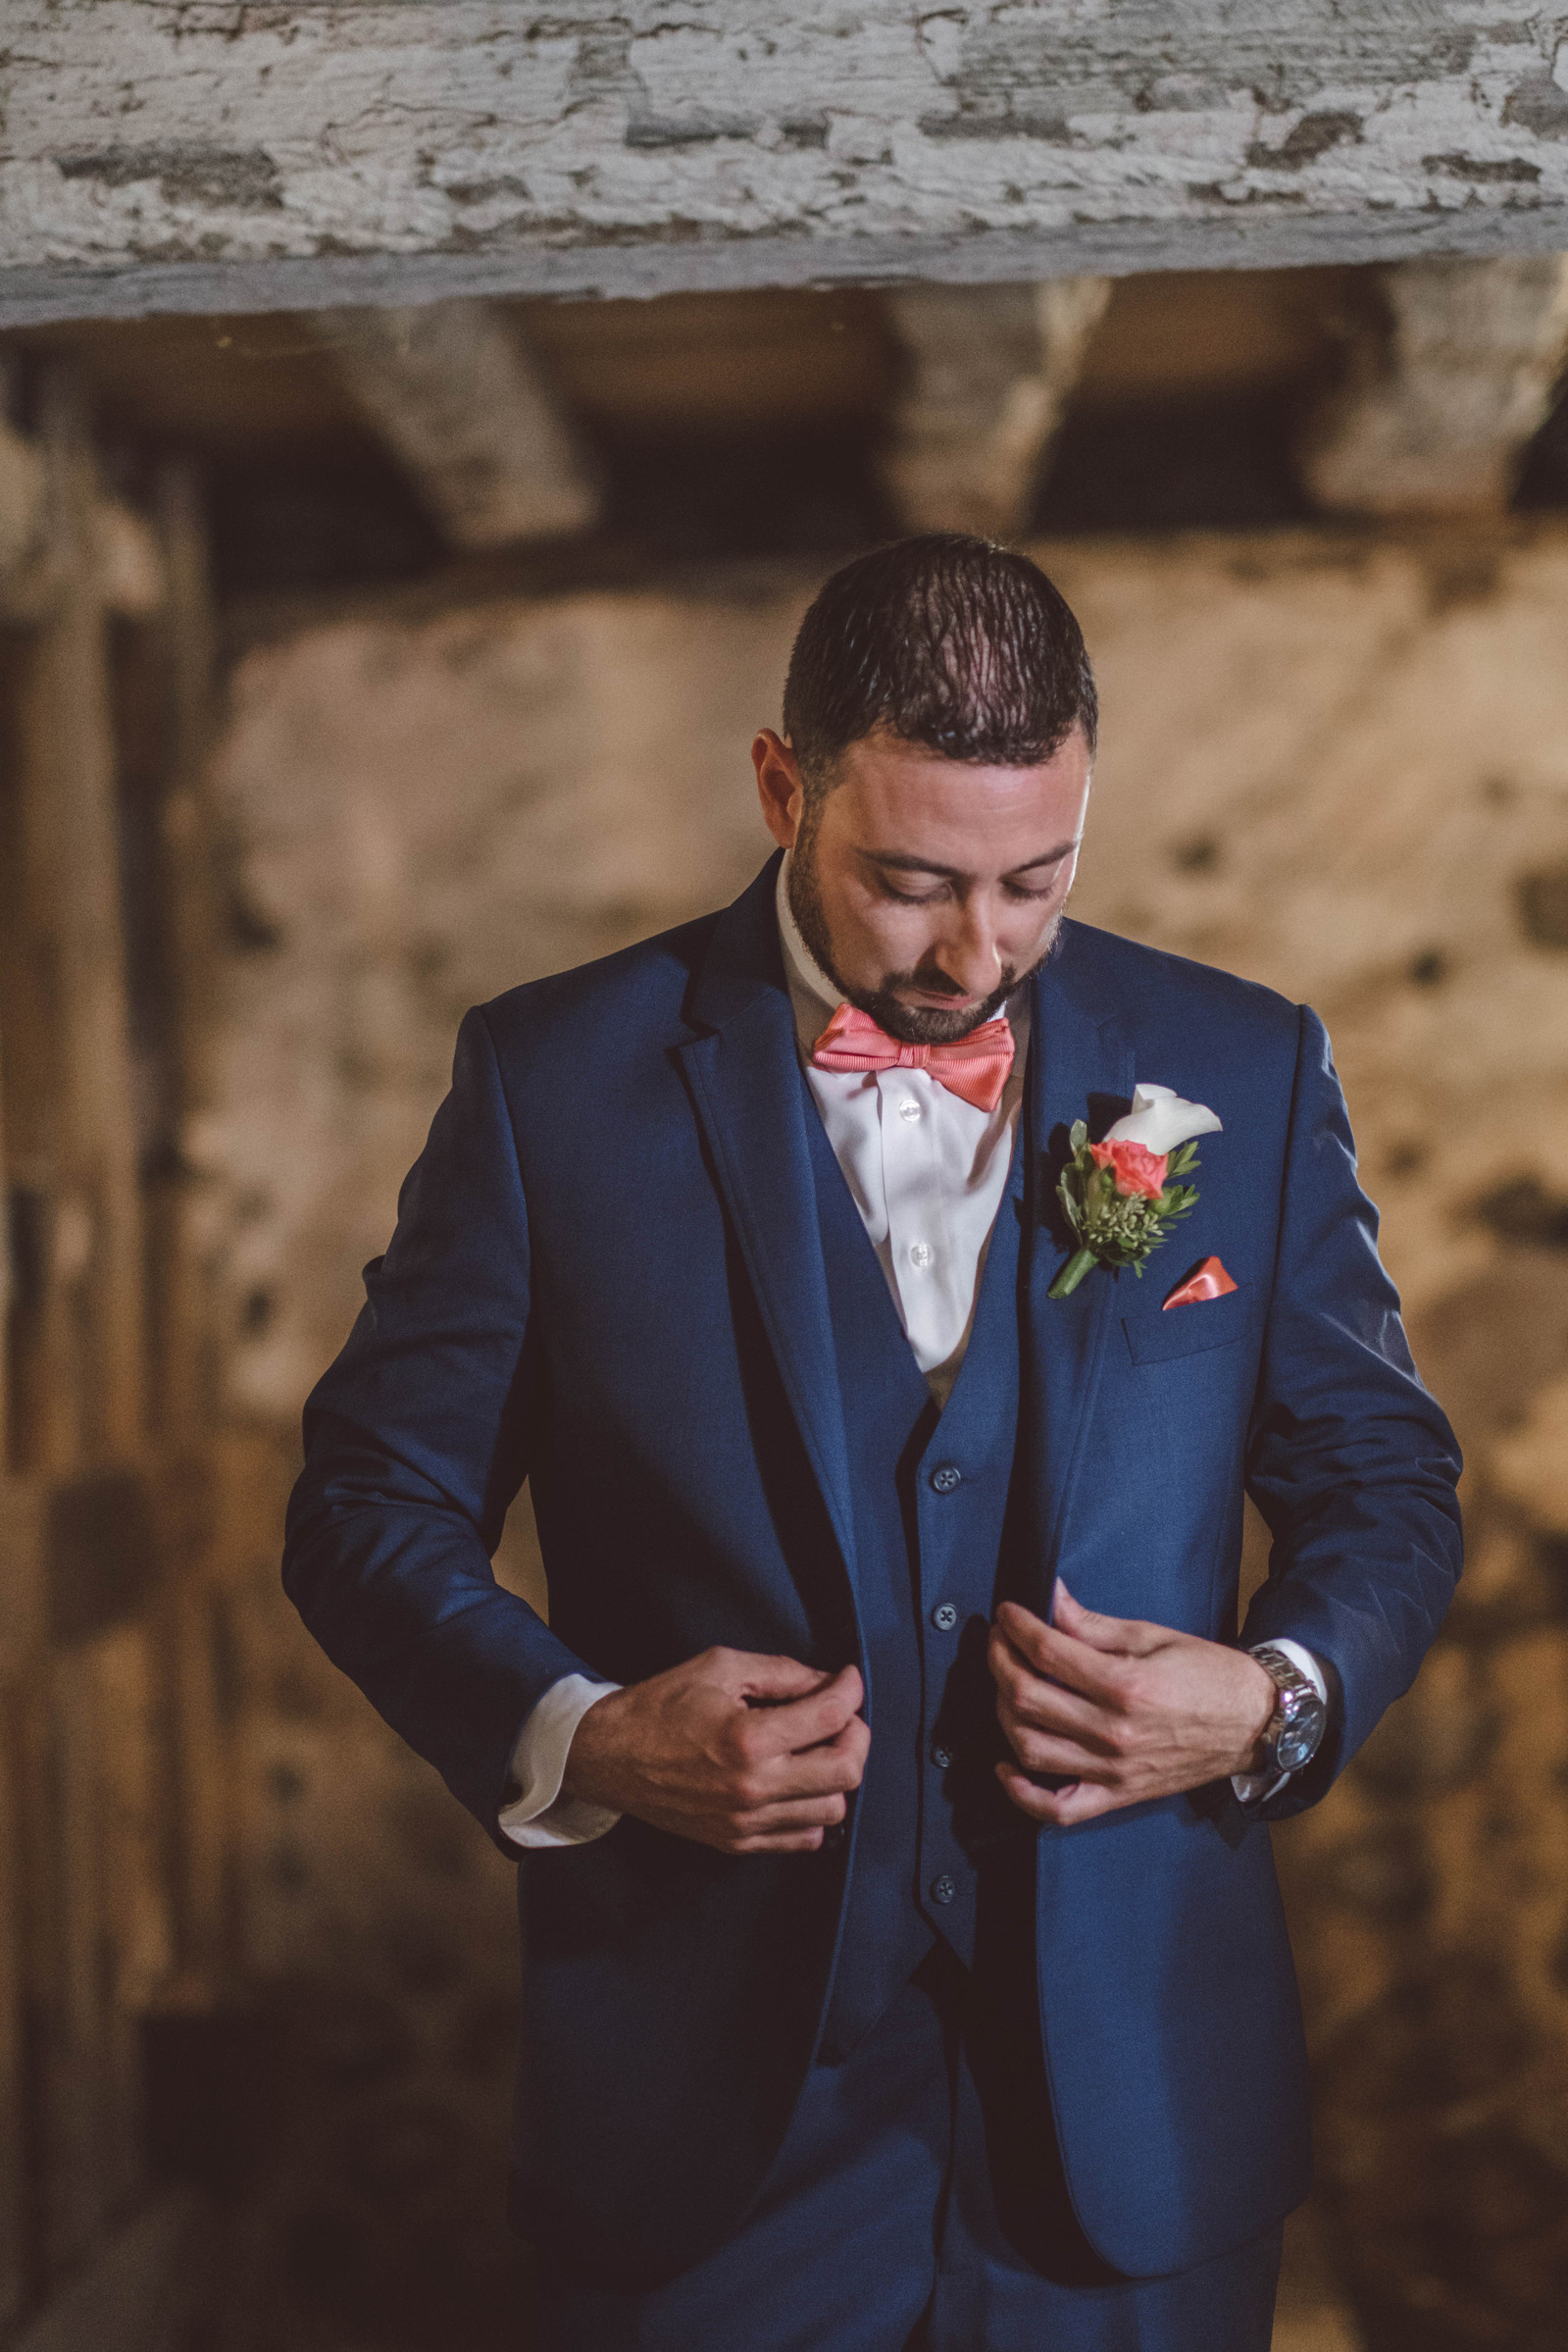 Groom buttons up his suit before his wedding.  Wearing a blue suit with a pink bowtie, standing in a rustic location of a barn.